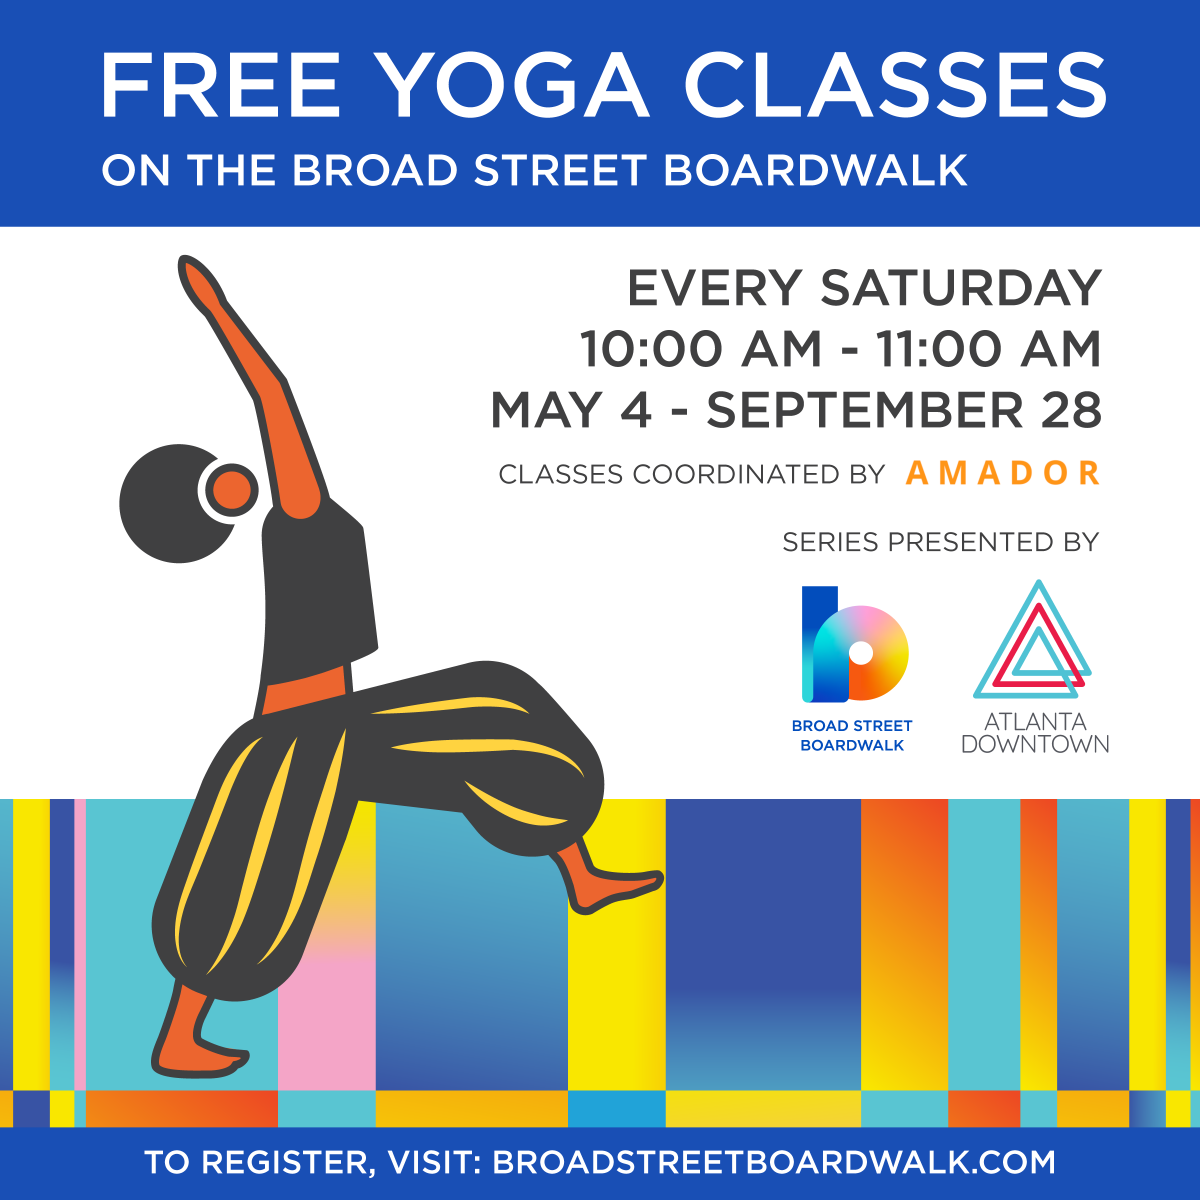 🧘‍♂️ Starting May 4th: FREE YOGA CLASSES are back on the Broad Street Boardwalk every Saturday from 10:00 - 11:00 AM. Be sure to RSVP and BYOM (Bring Your Own Mat) and water. These classes are in partnership with Malik Khalid of Amador Yoga ☮️ RSVP Link: bit.ly/49G8bbr